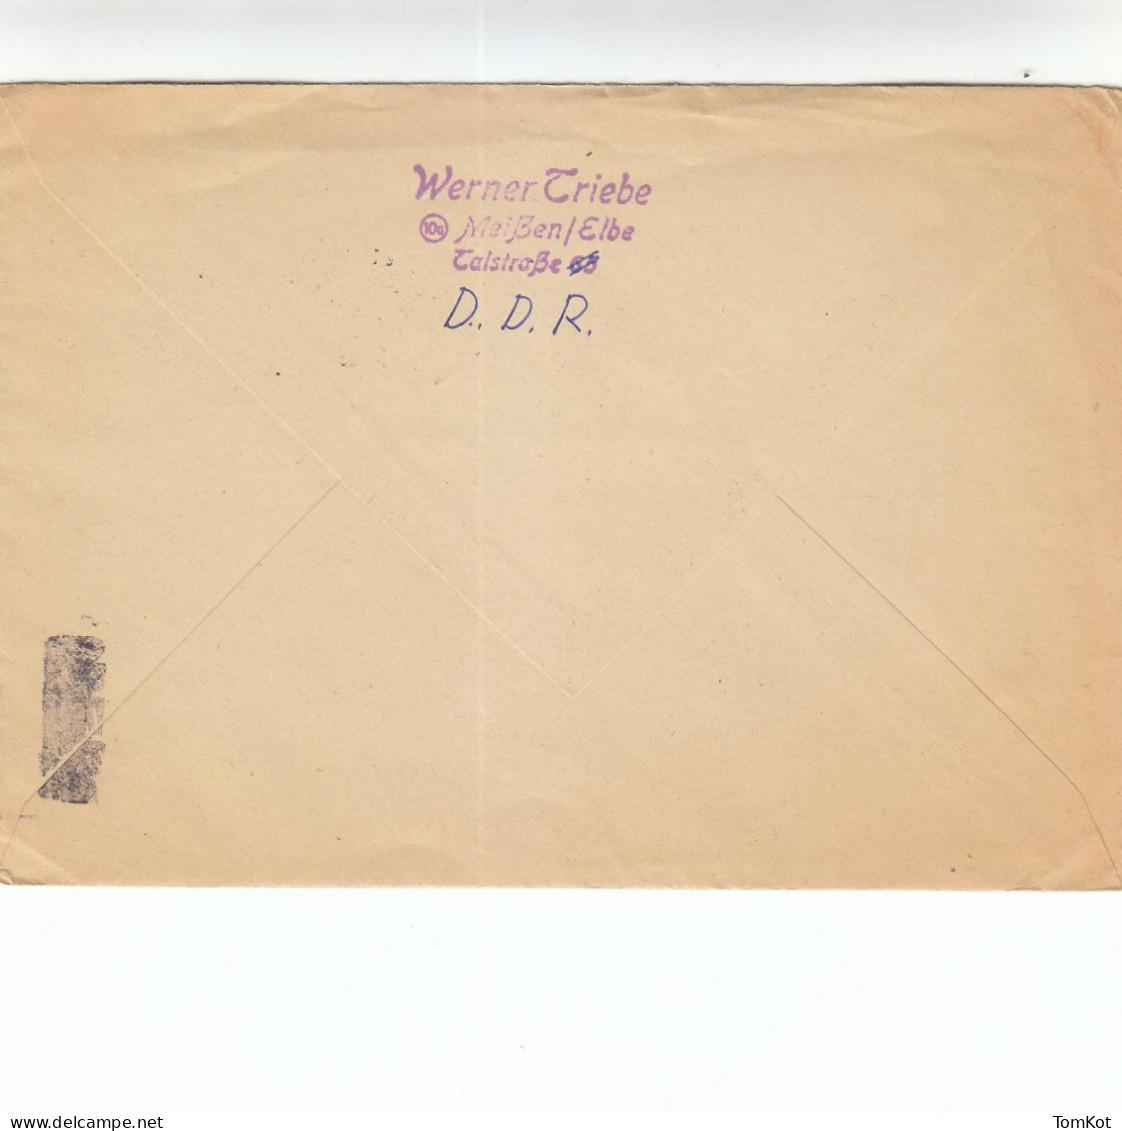 Airmail Cover DDR 1959. Meissen - Lettres & Documents